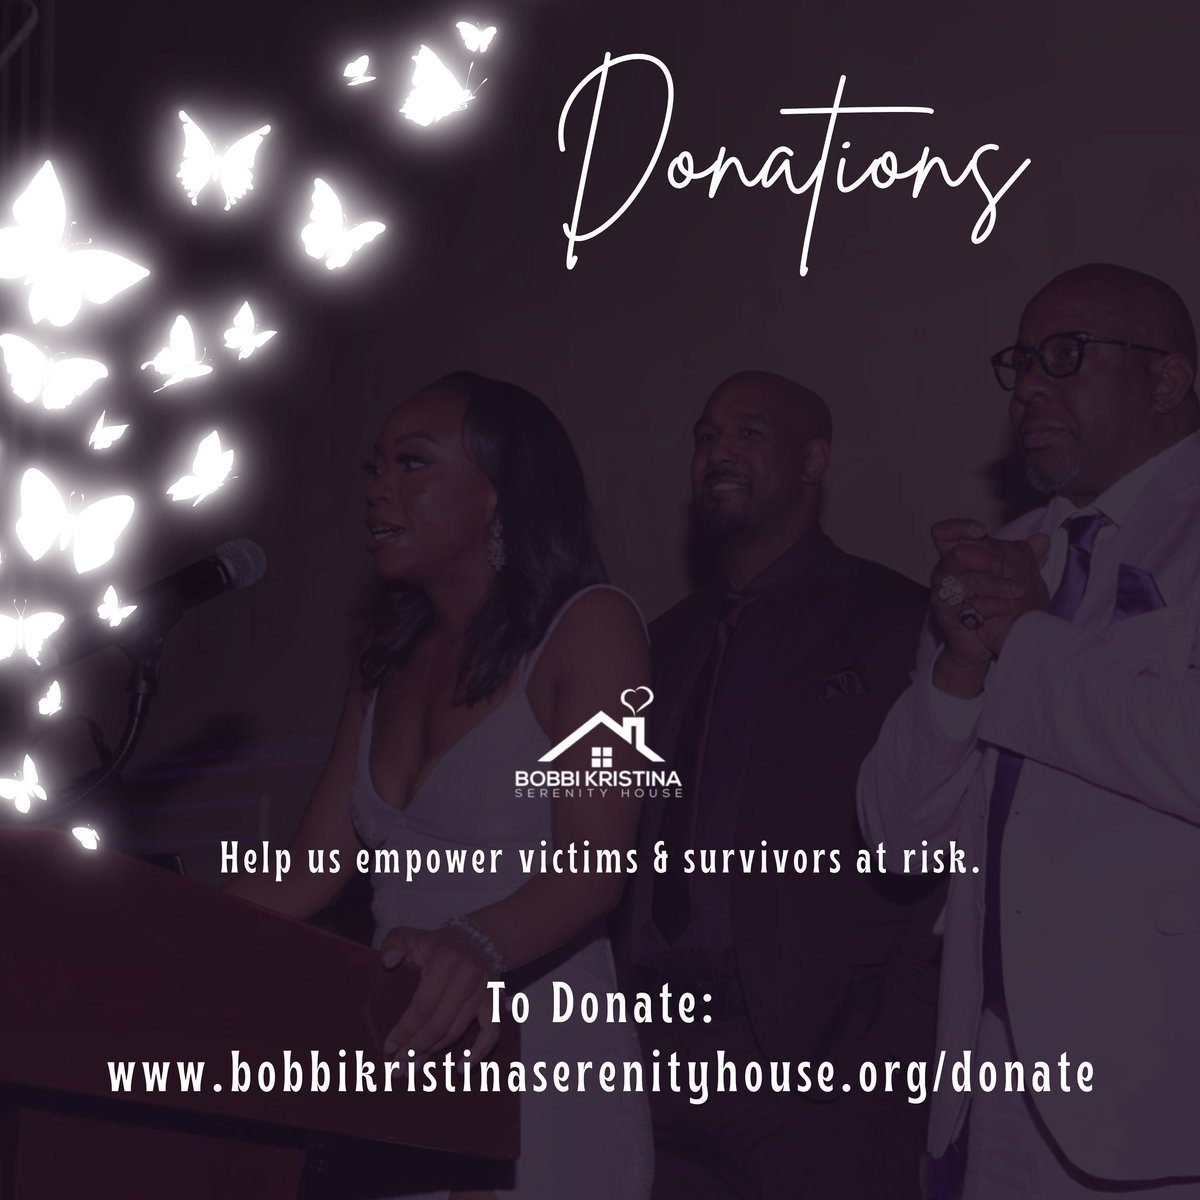 The event might be over, but the #BobbiKristinaSerenityHouse is just beginning. If you were unable to attend, or would simply like to donate to our cause, we invite you to visit our donation page in an effort to help us empower victims & survivors at risk. 💜🦋